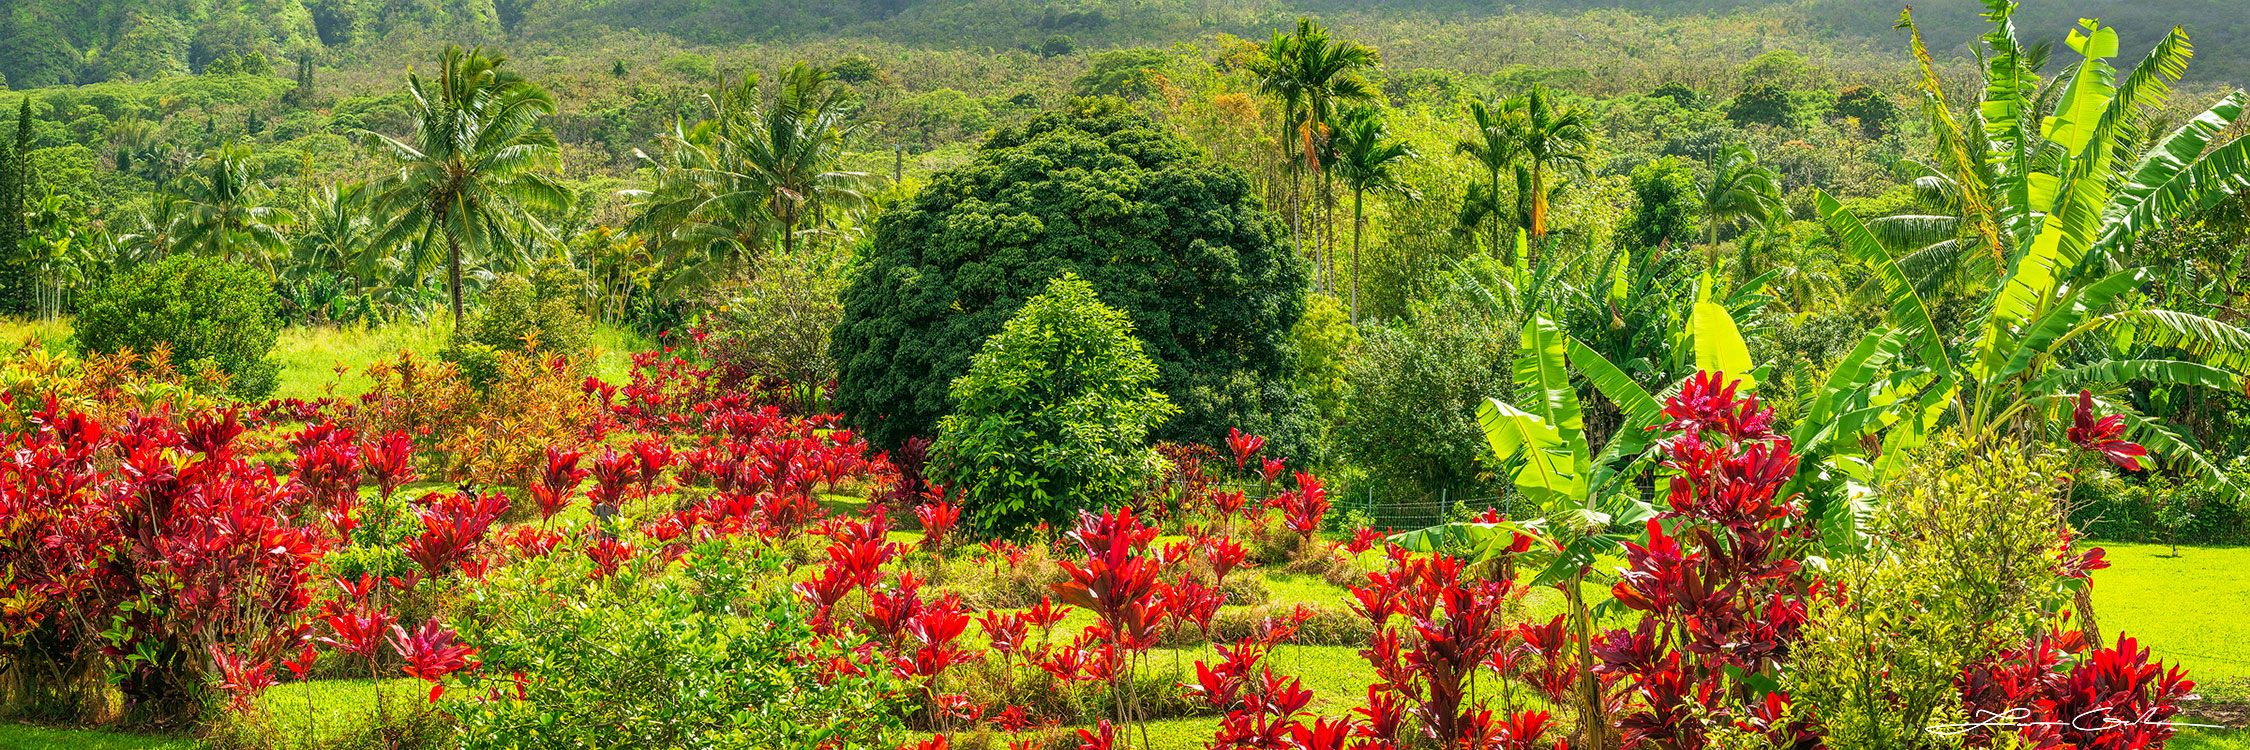 Pano of a lush Hawaiian landscape, featuring tall red flowers in the foreground against an extensive green backdrop of palms, shrubs, and trees in Maui - Gintchin Fine Art.